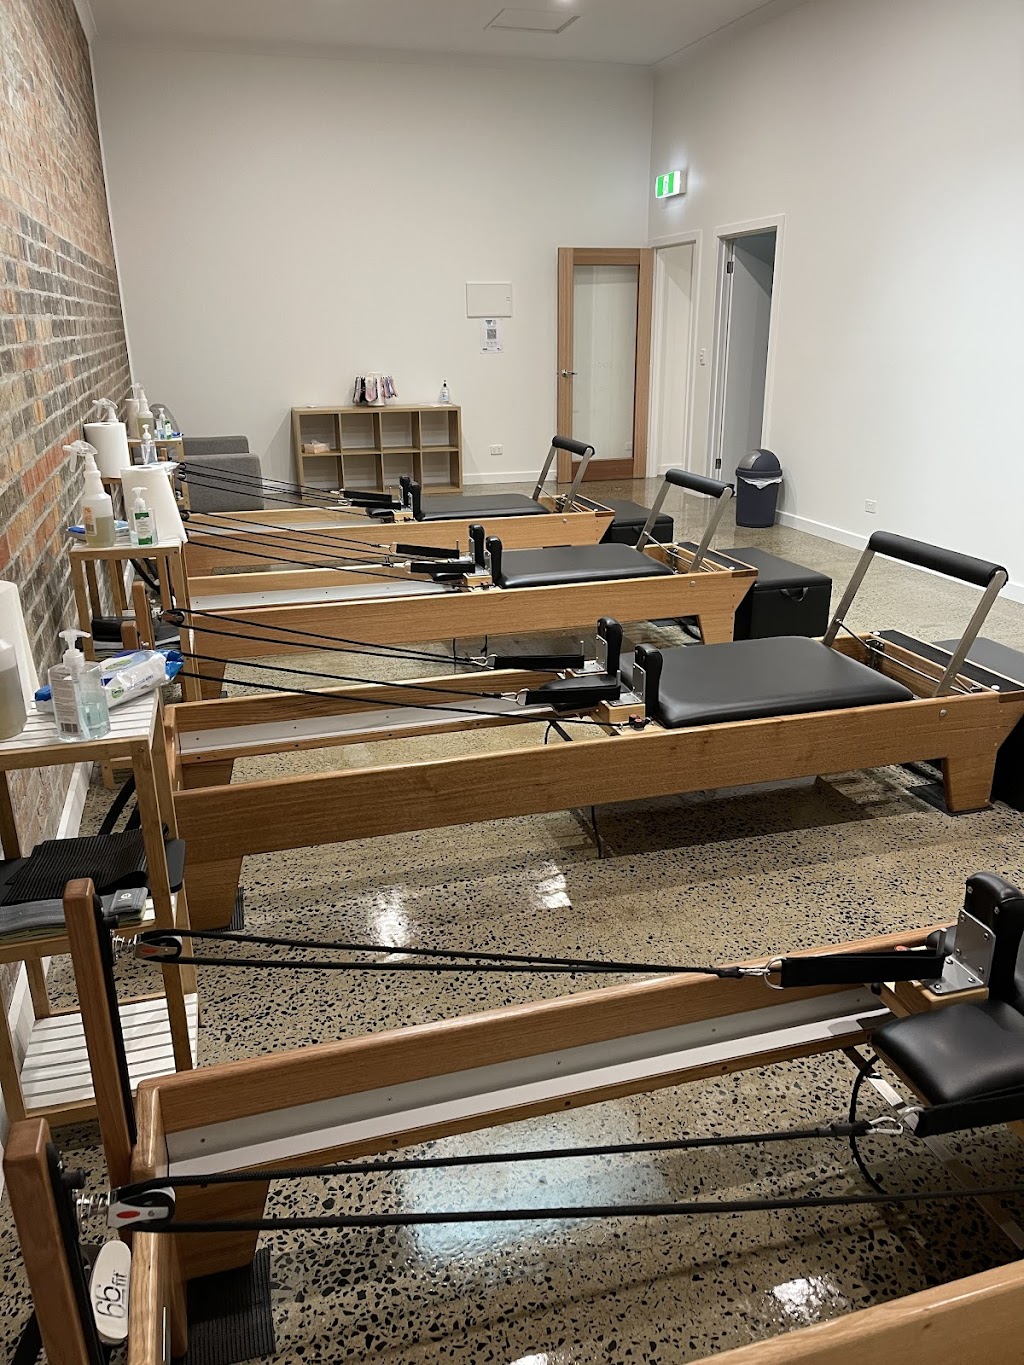 Reform R Pilates | gym | Shops 3 and 4 (Rear access, 22 Howe St, Daylesford VIC 3460, Australia | 0427300585 OR +61 427 300 585